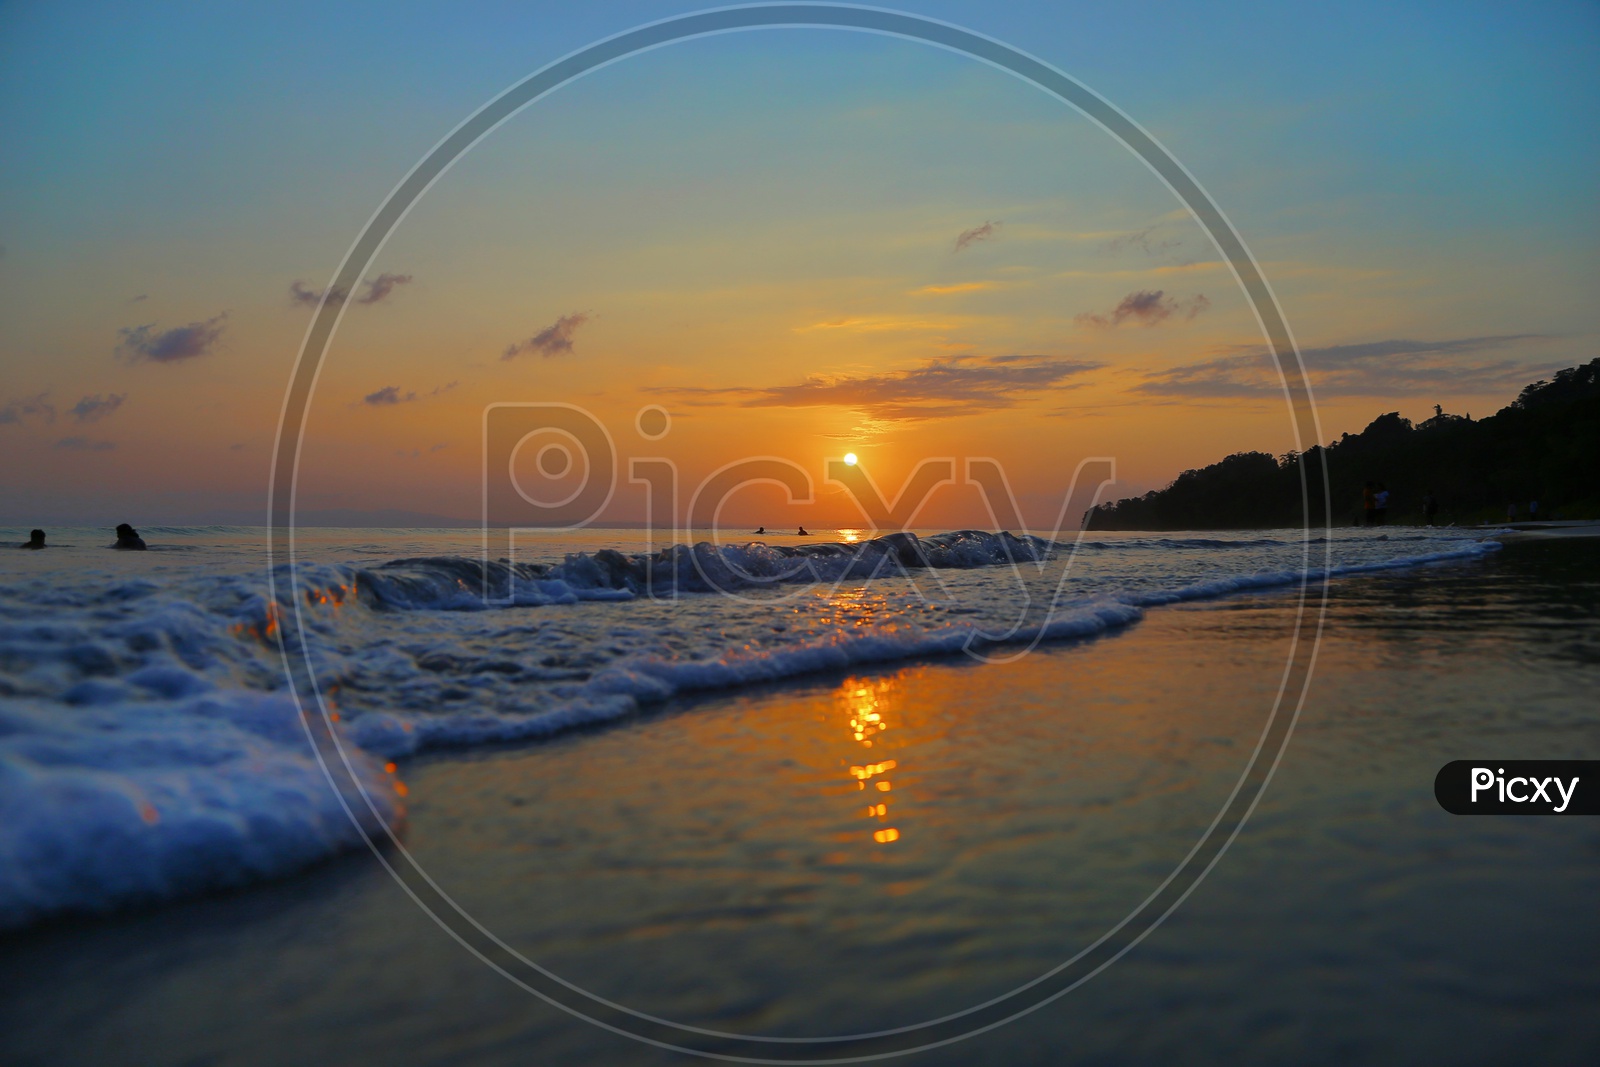 Sunset Over A Beach With Sea Waves Striking The Beach